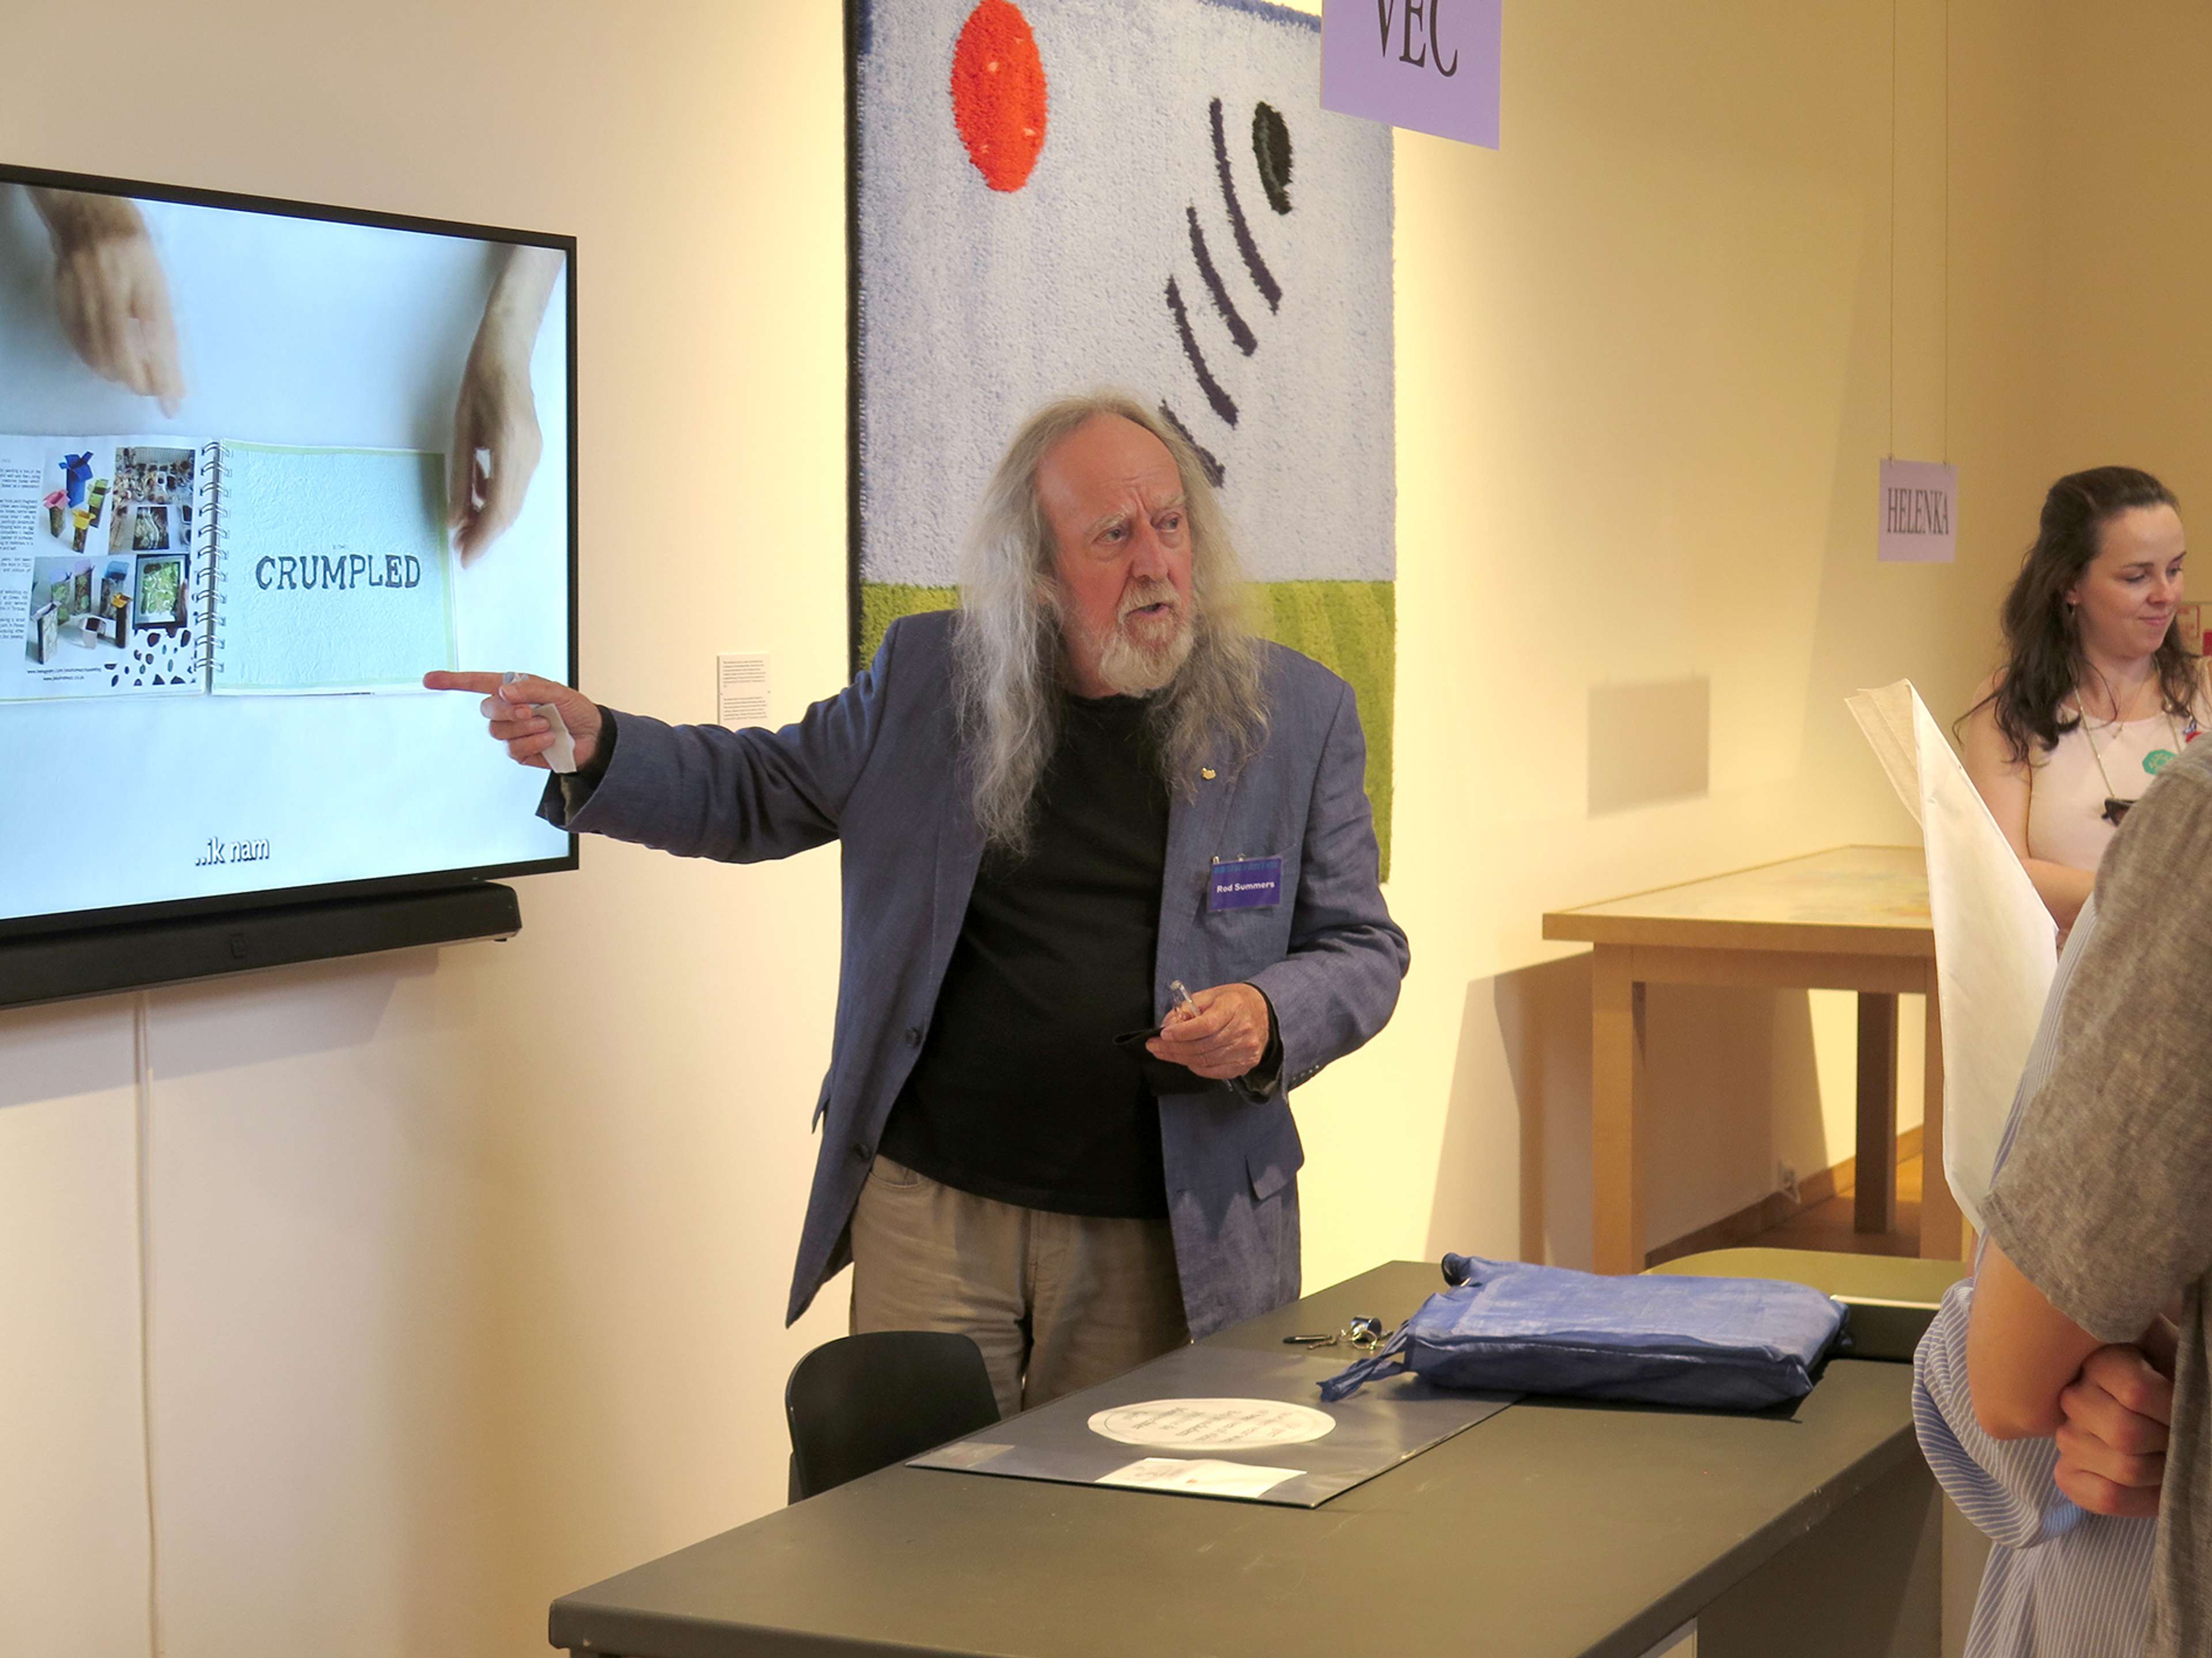 The VEC archives of Rod Summers. An exhibition curated by Joep Vossebeld, Rod Summers and Martin La Roche at the Bonnefanten Museum, Maastricht, the Netherlands.